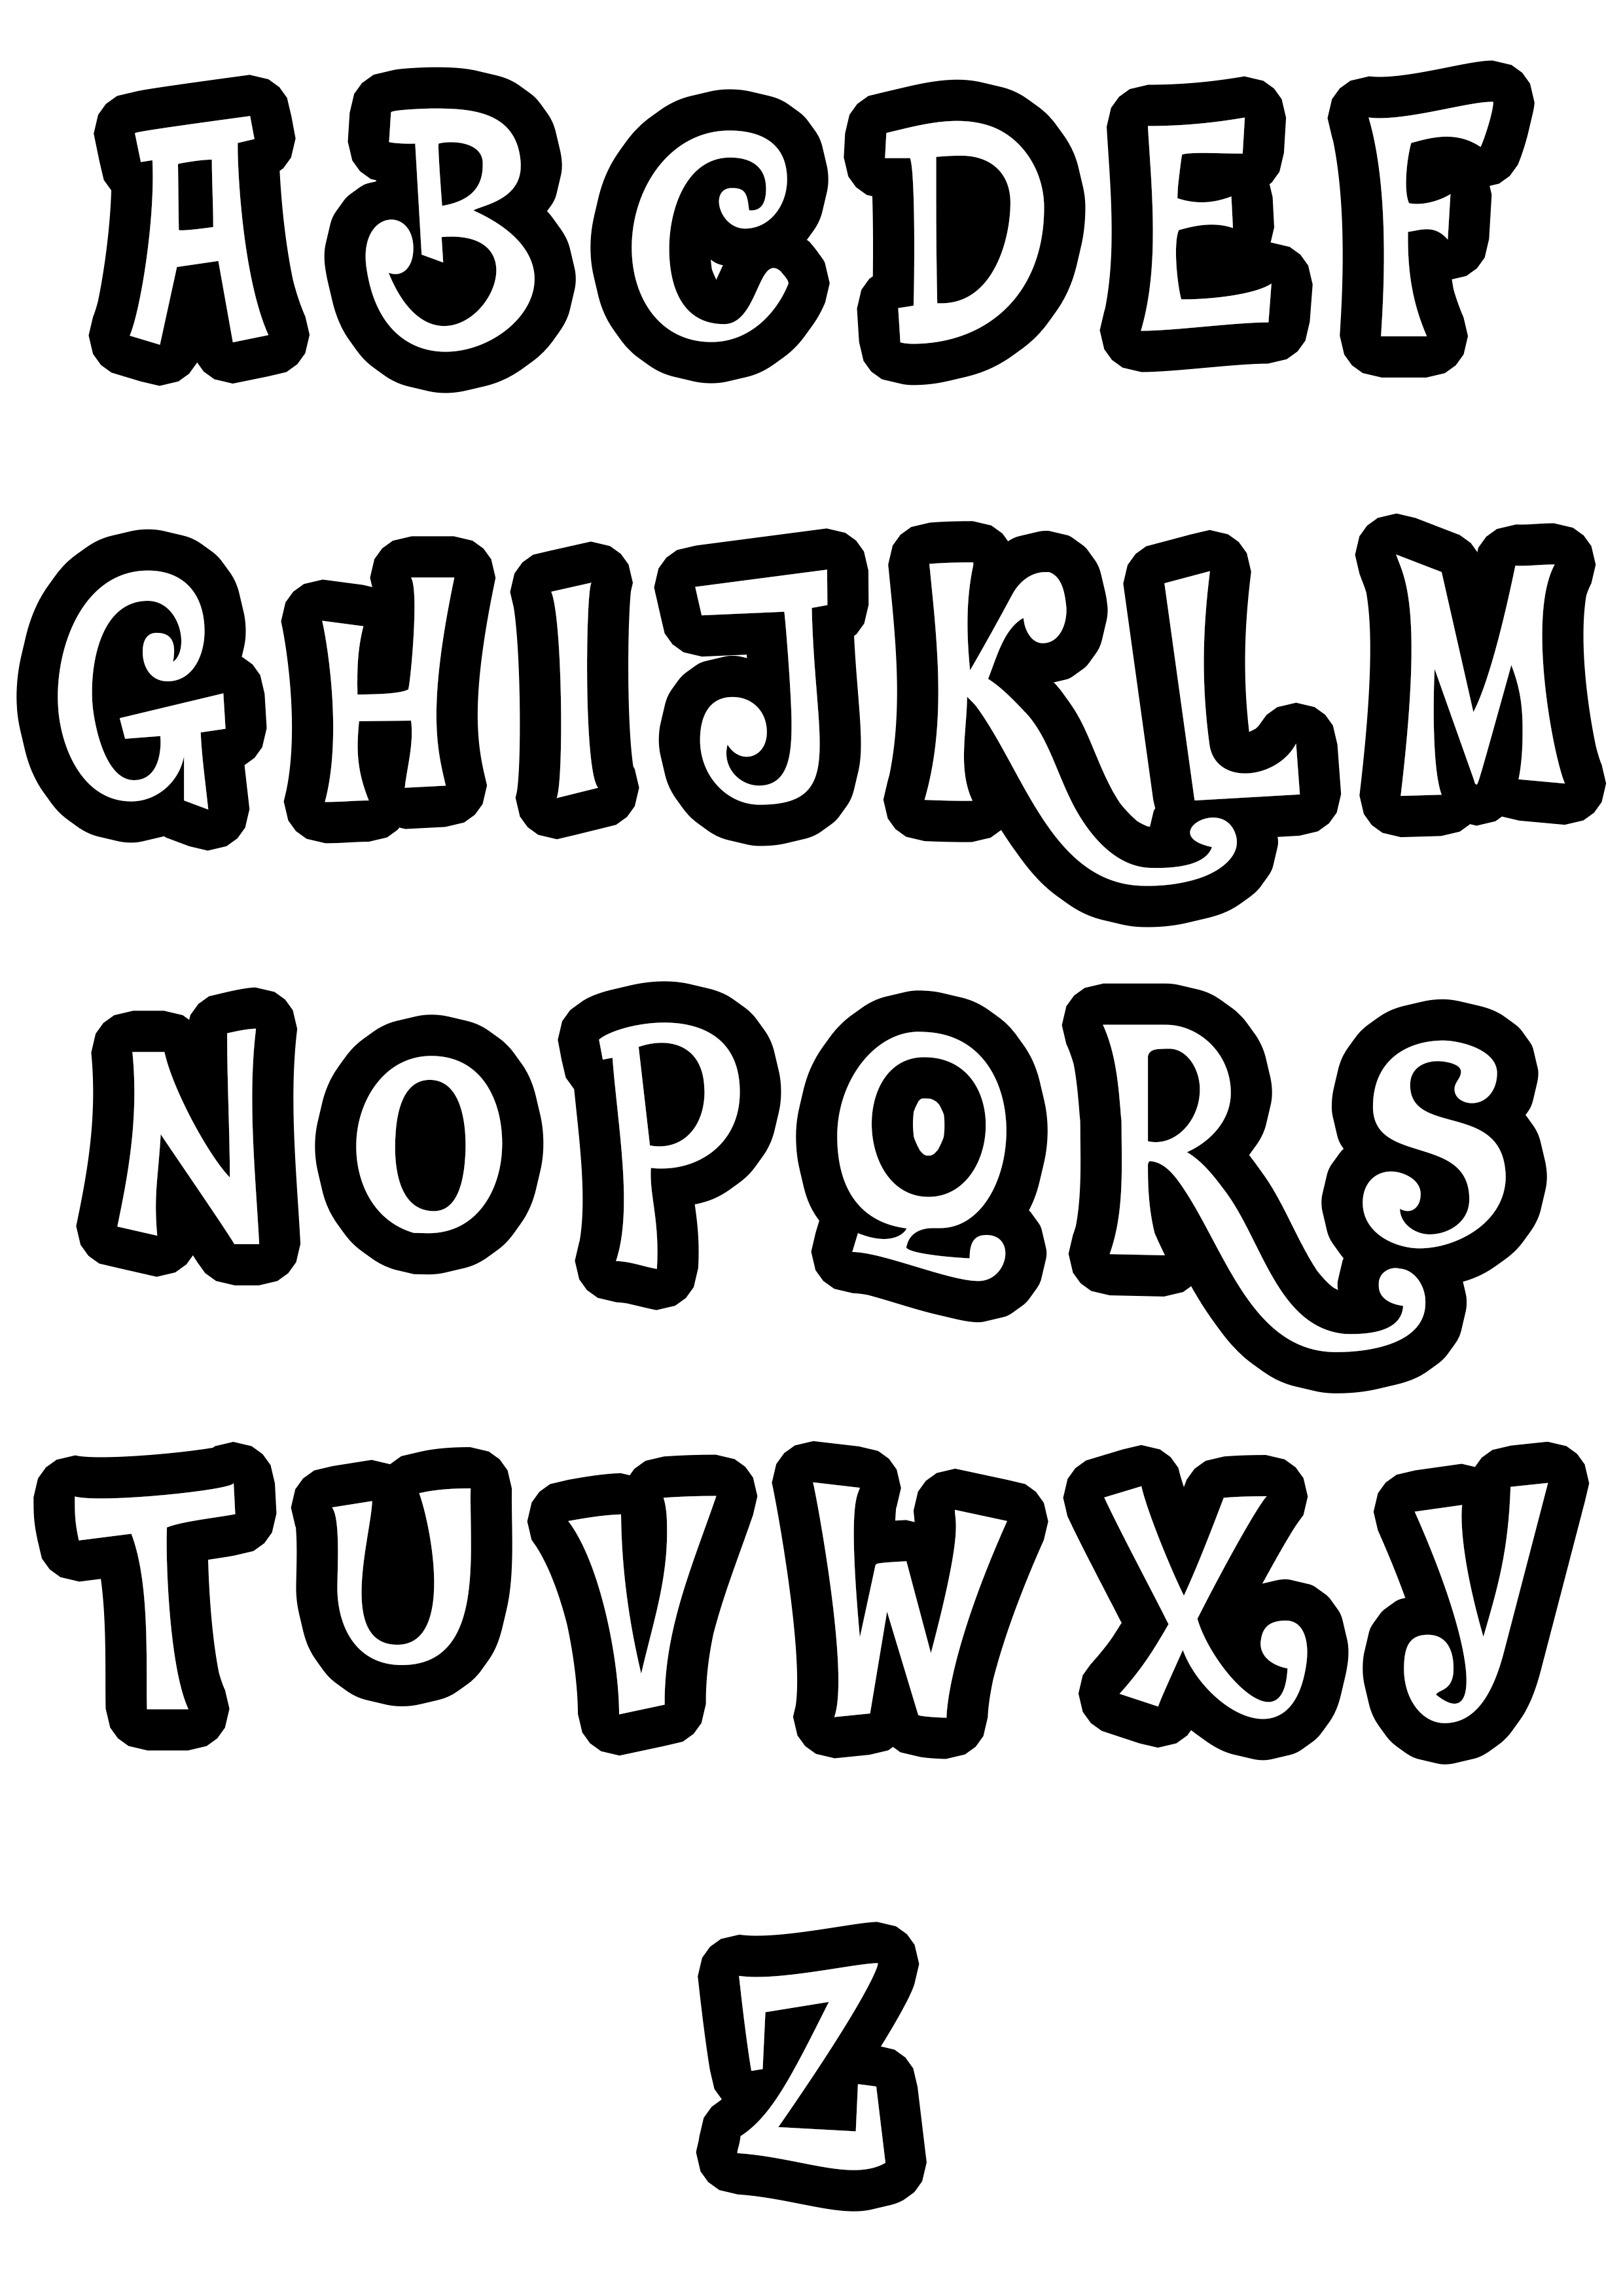 Free Alphabet coloring page to download : From A to Z (large borders)